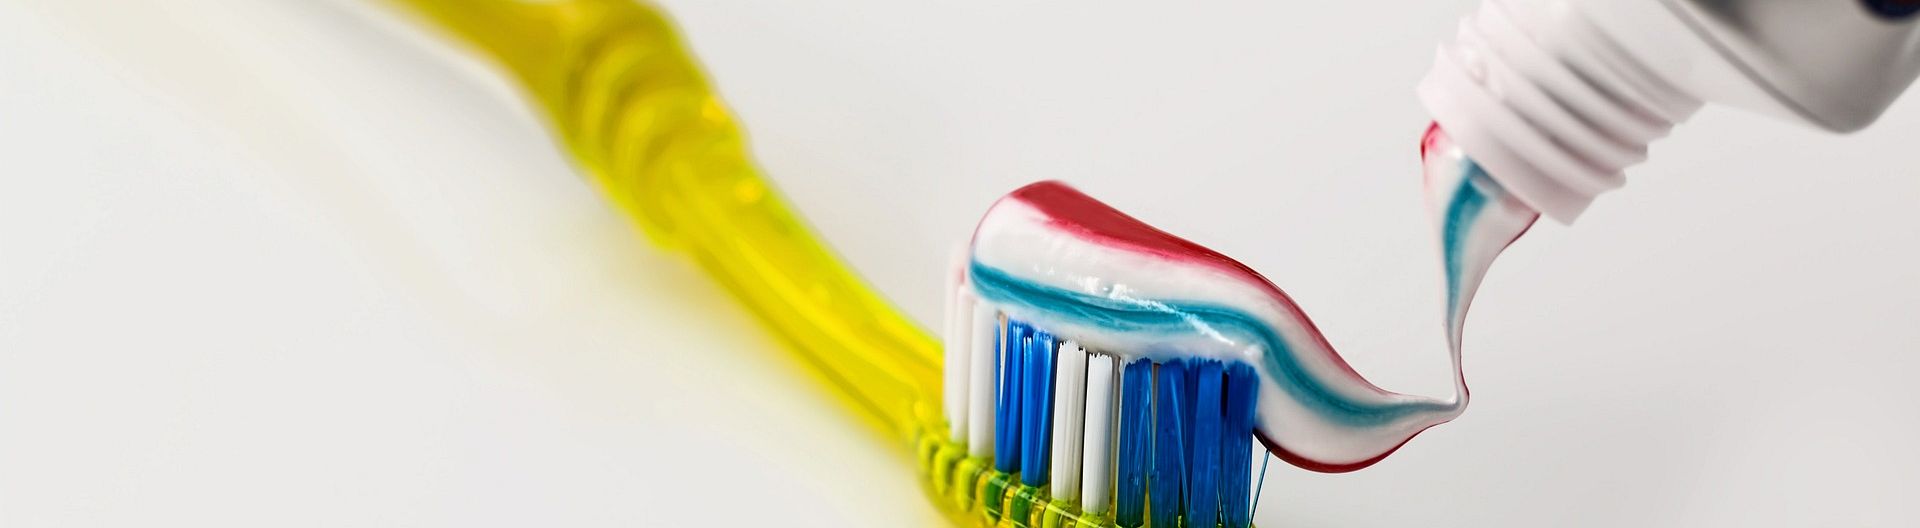 How to choose the right toothpaste